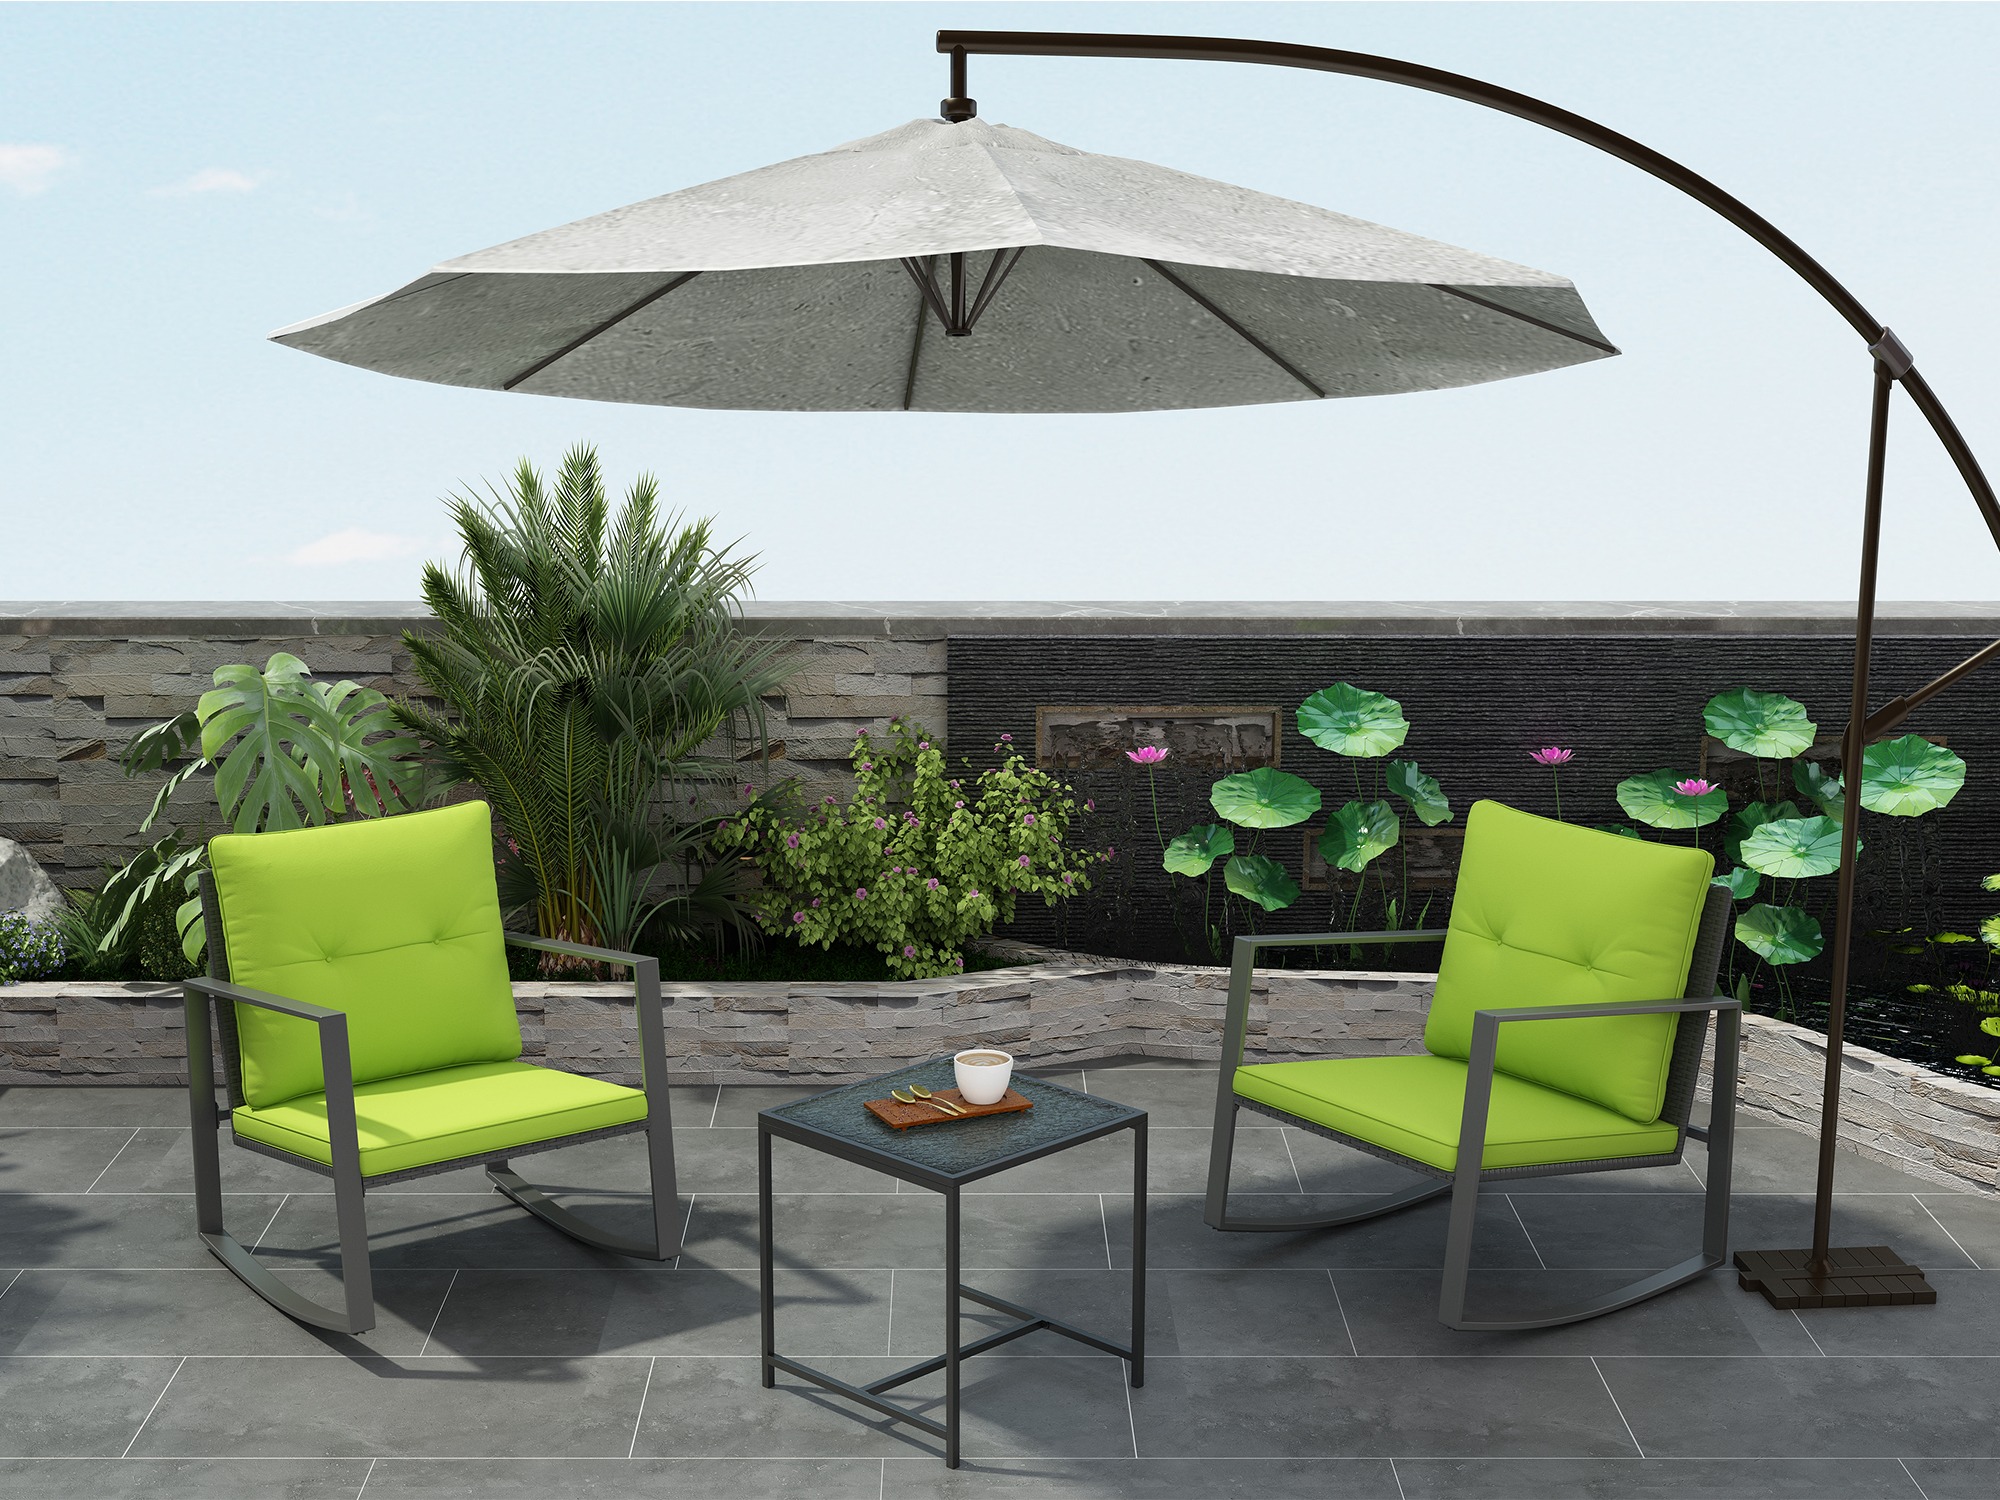 Fleur 3-Piece Patio Furniture Set -Two Solid Relaxing Chairs With Glass Garden Coffee Table - Green - image 2 of 9